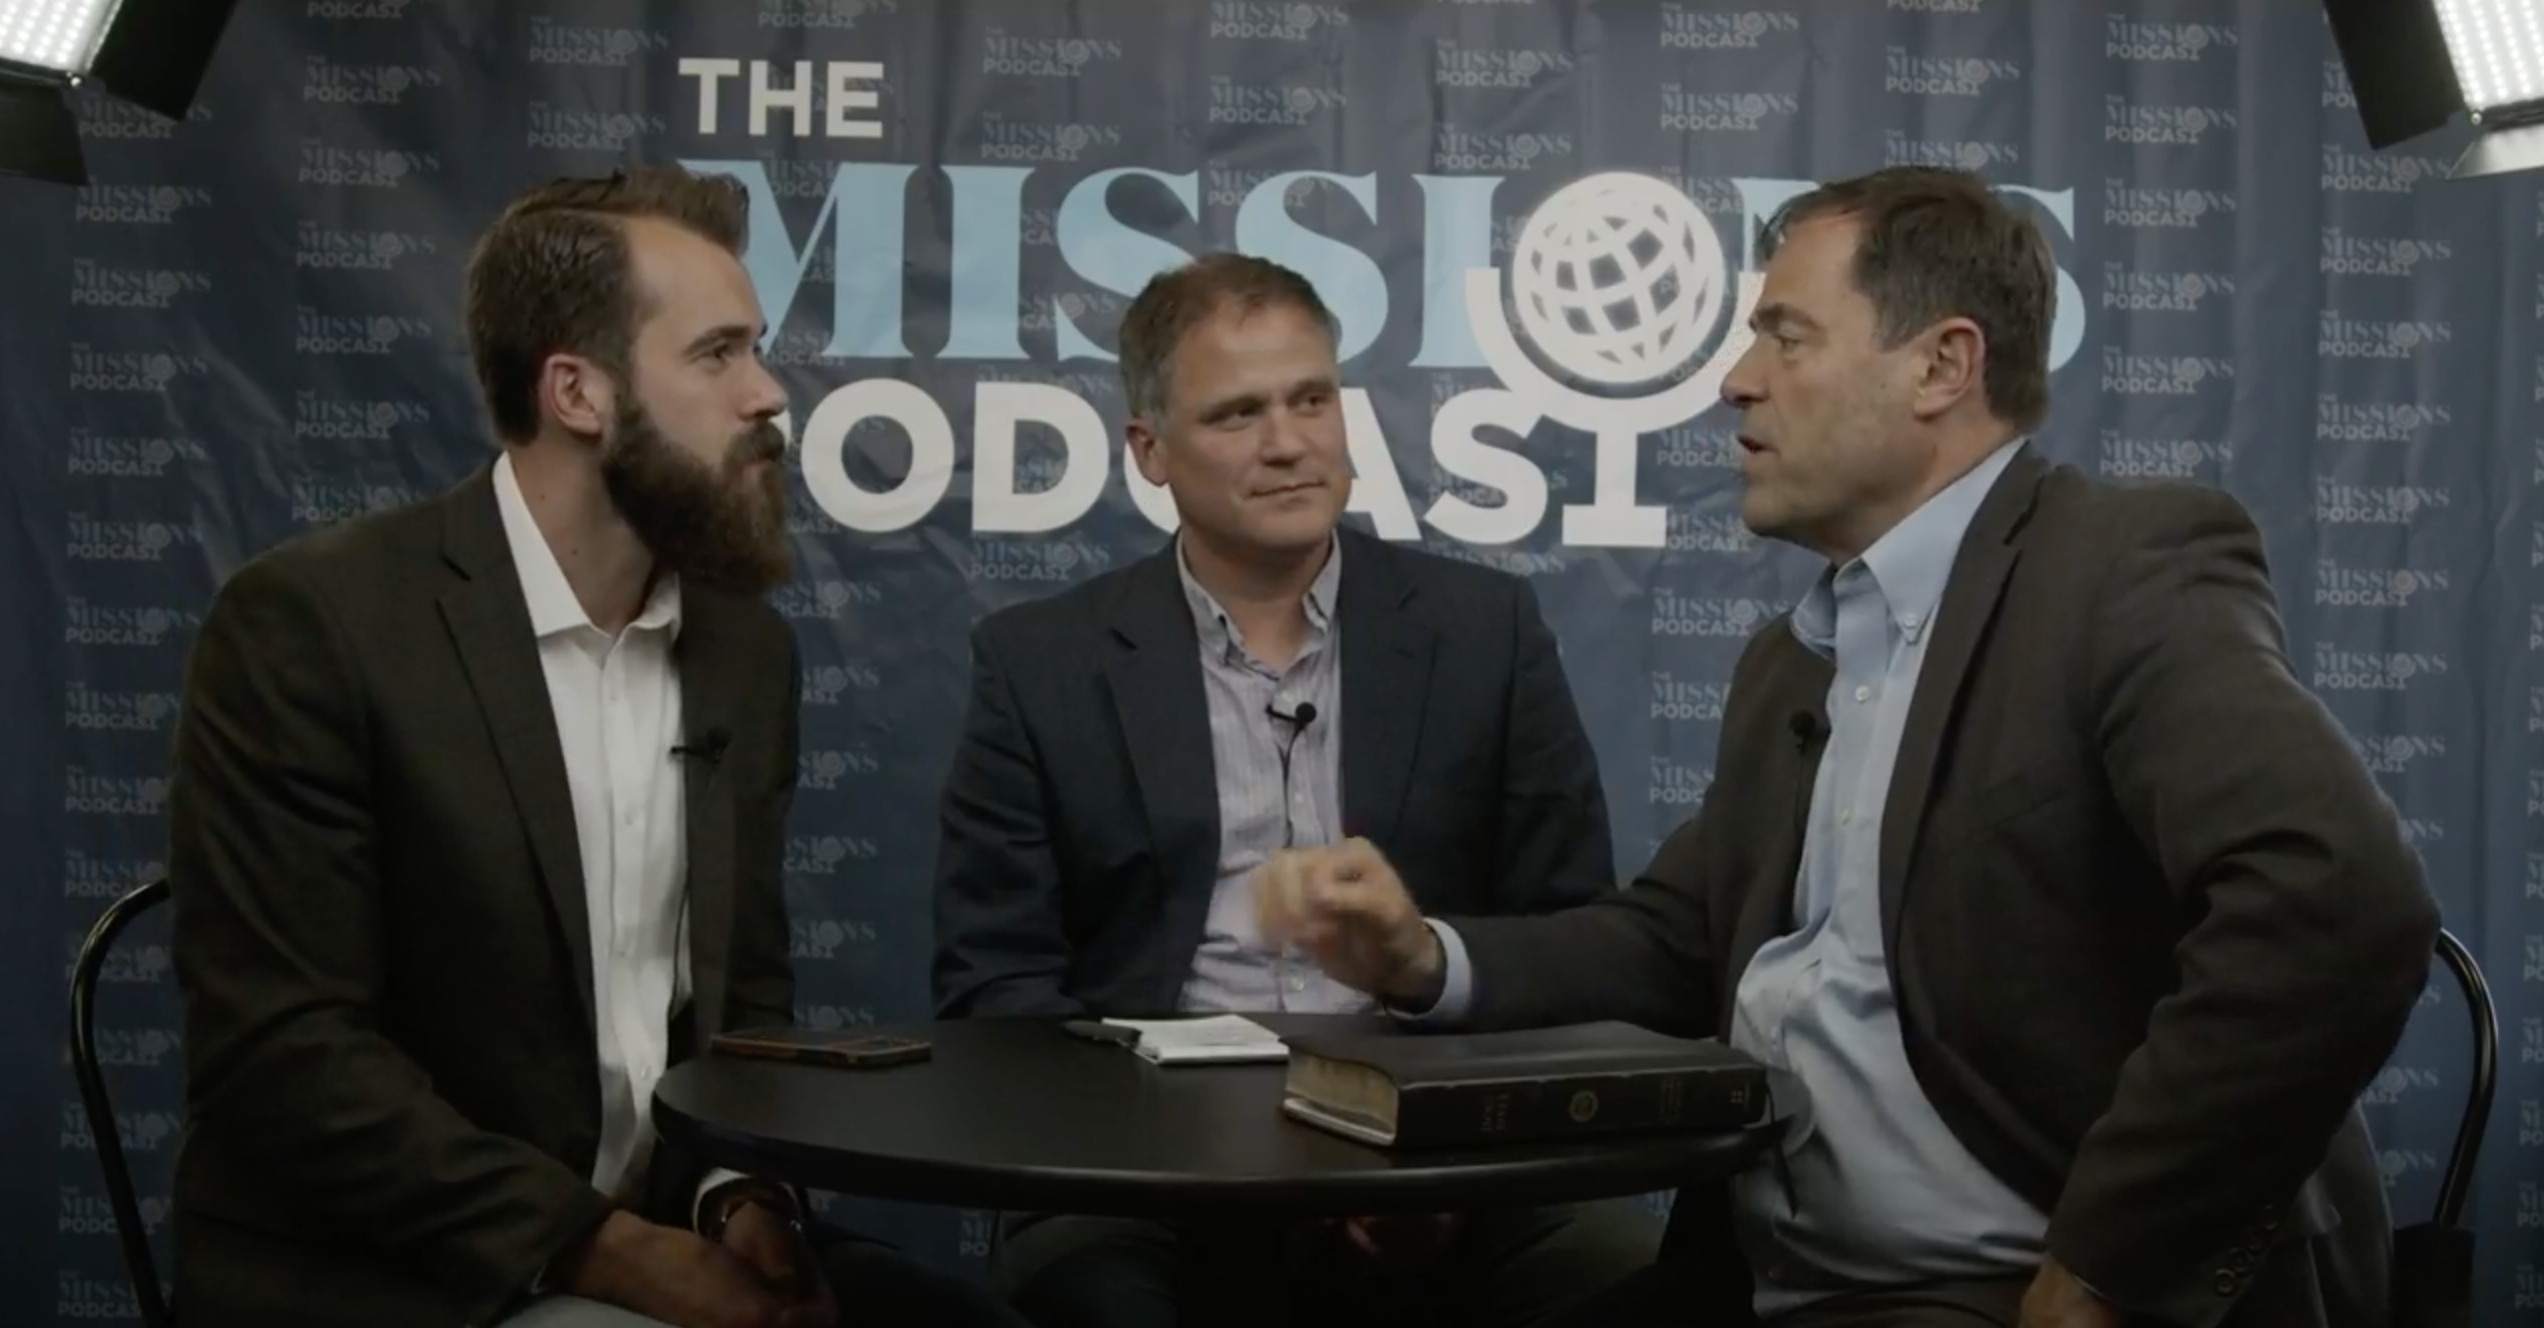 #RMC21: Mark Dever on Pragmatism, Ecclesiology, and the Post-COVID Church